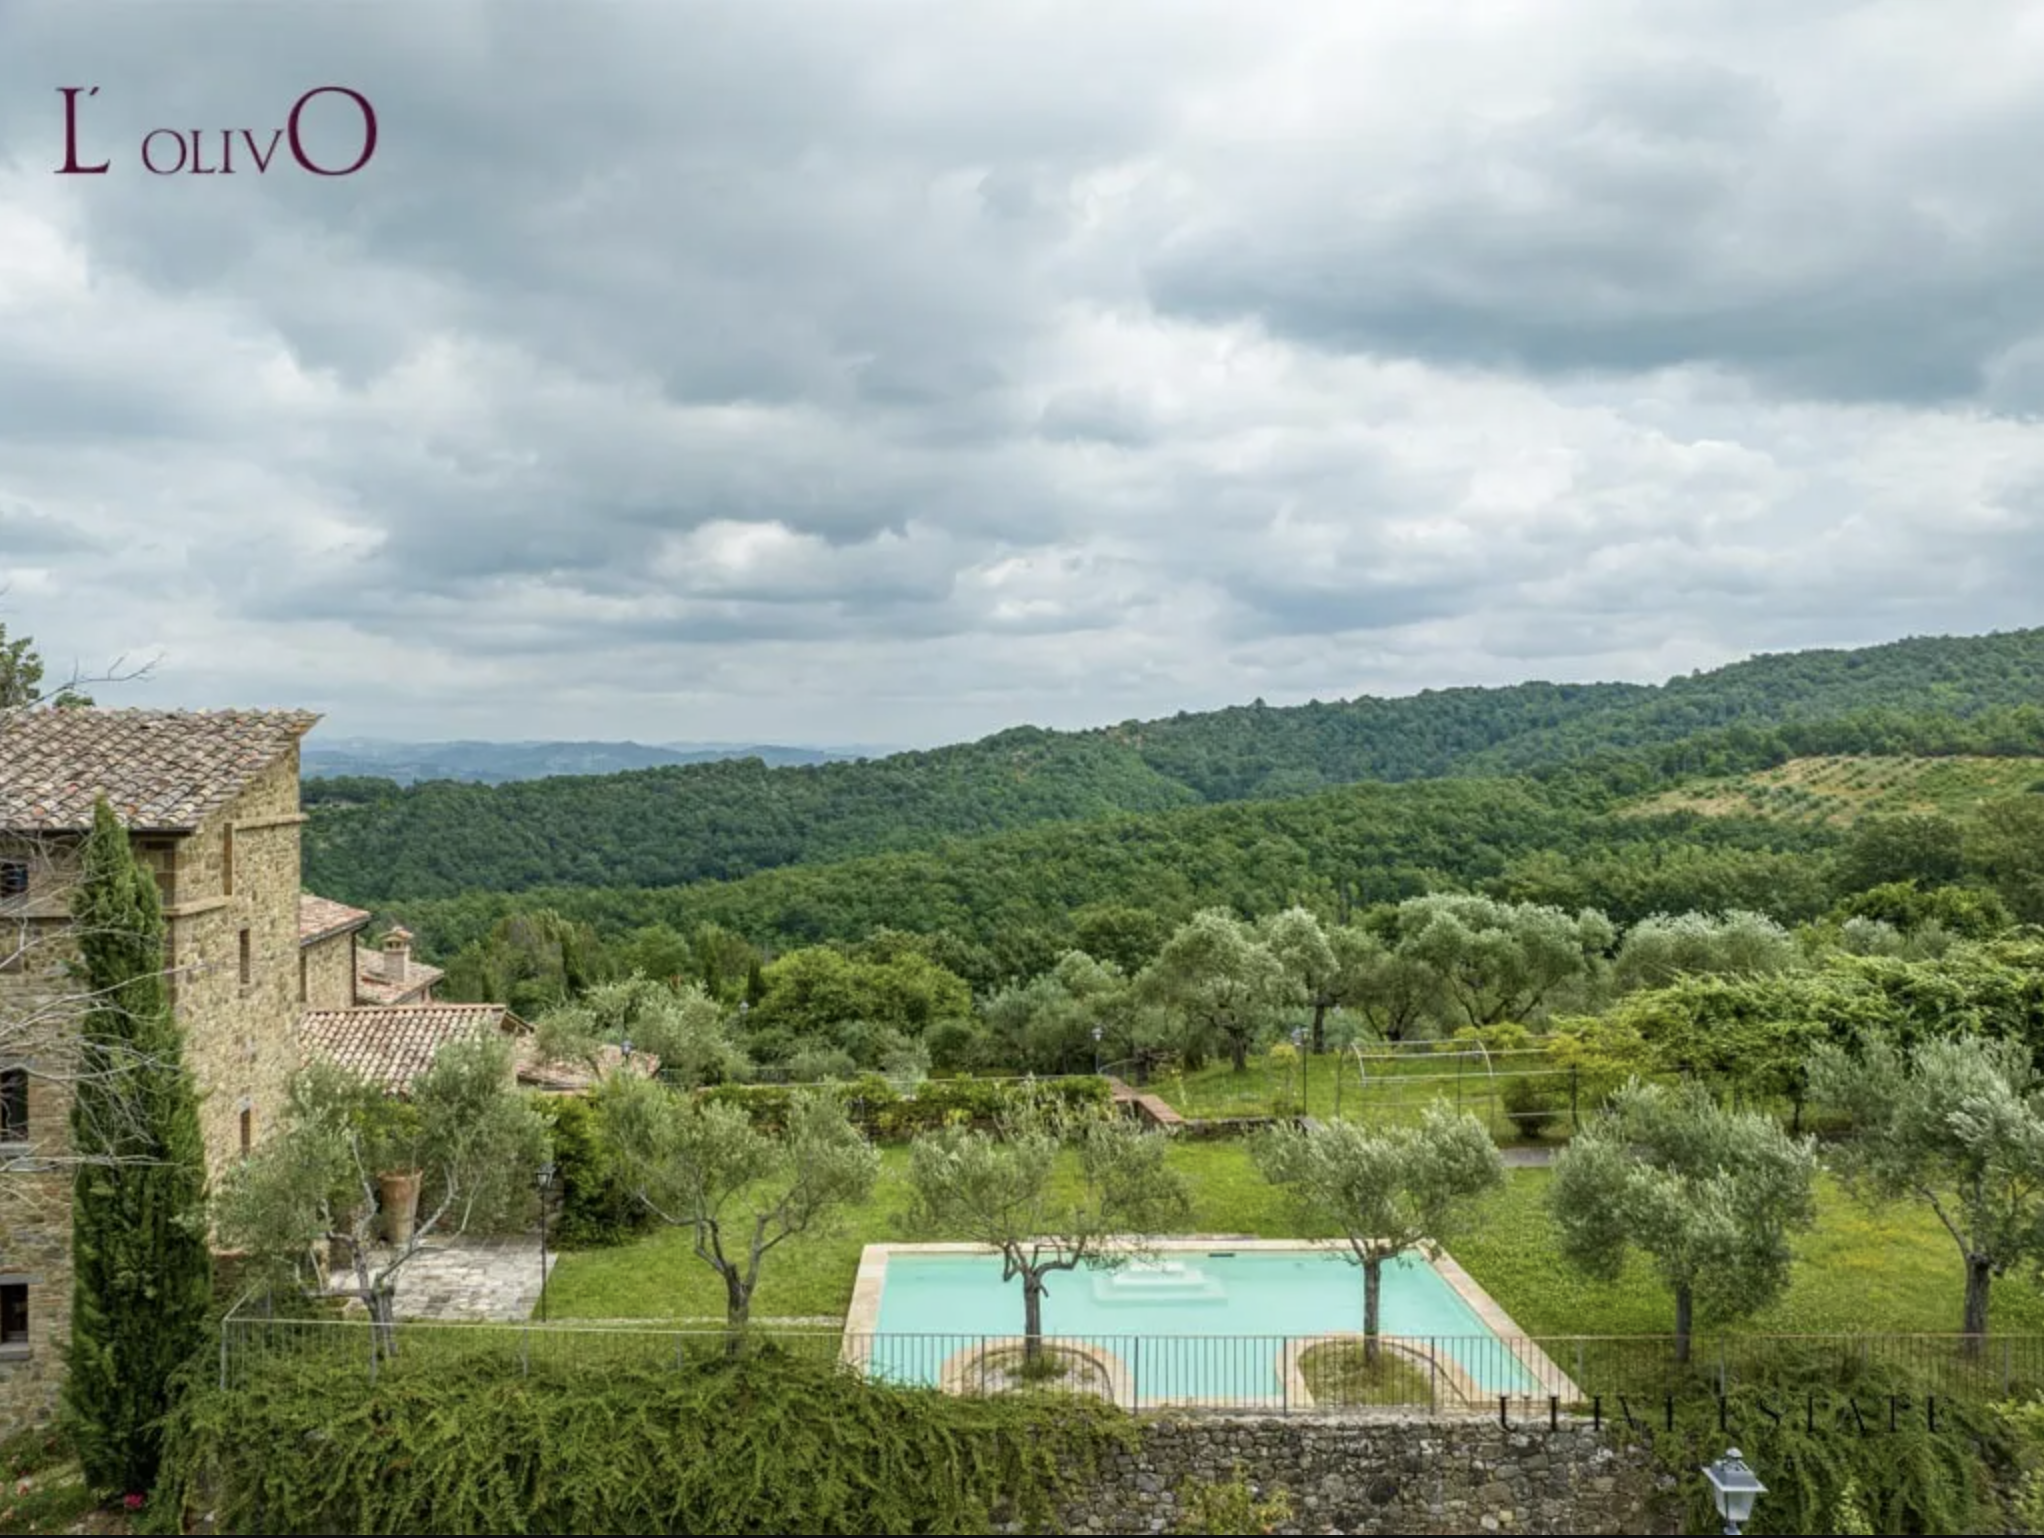 Francis York Borgo Pieve di Comunaglia in Umbria, Italy With 17 Country Houses, 1000-Year-Old Church, Vineyards 00038.png